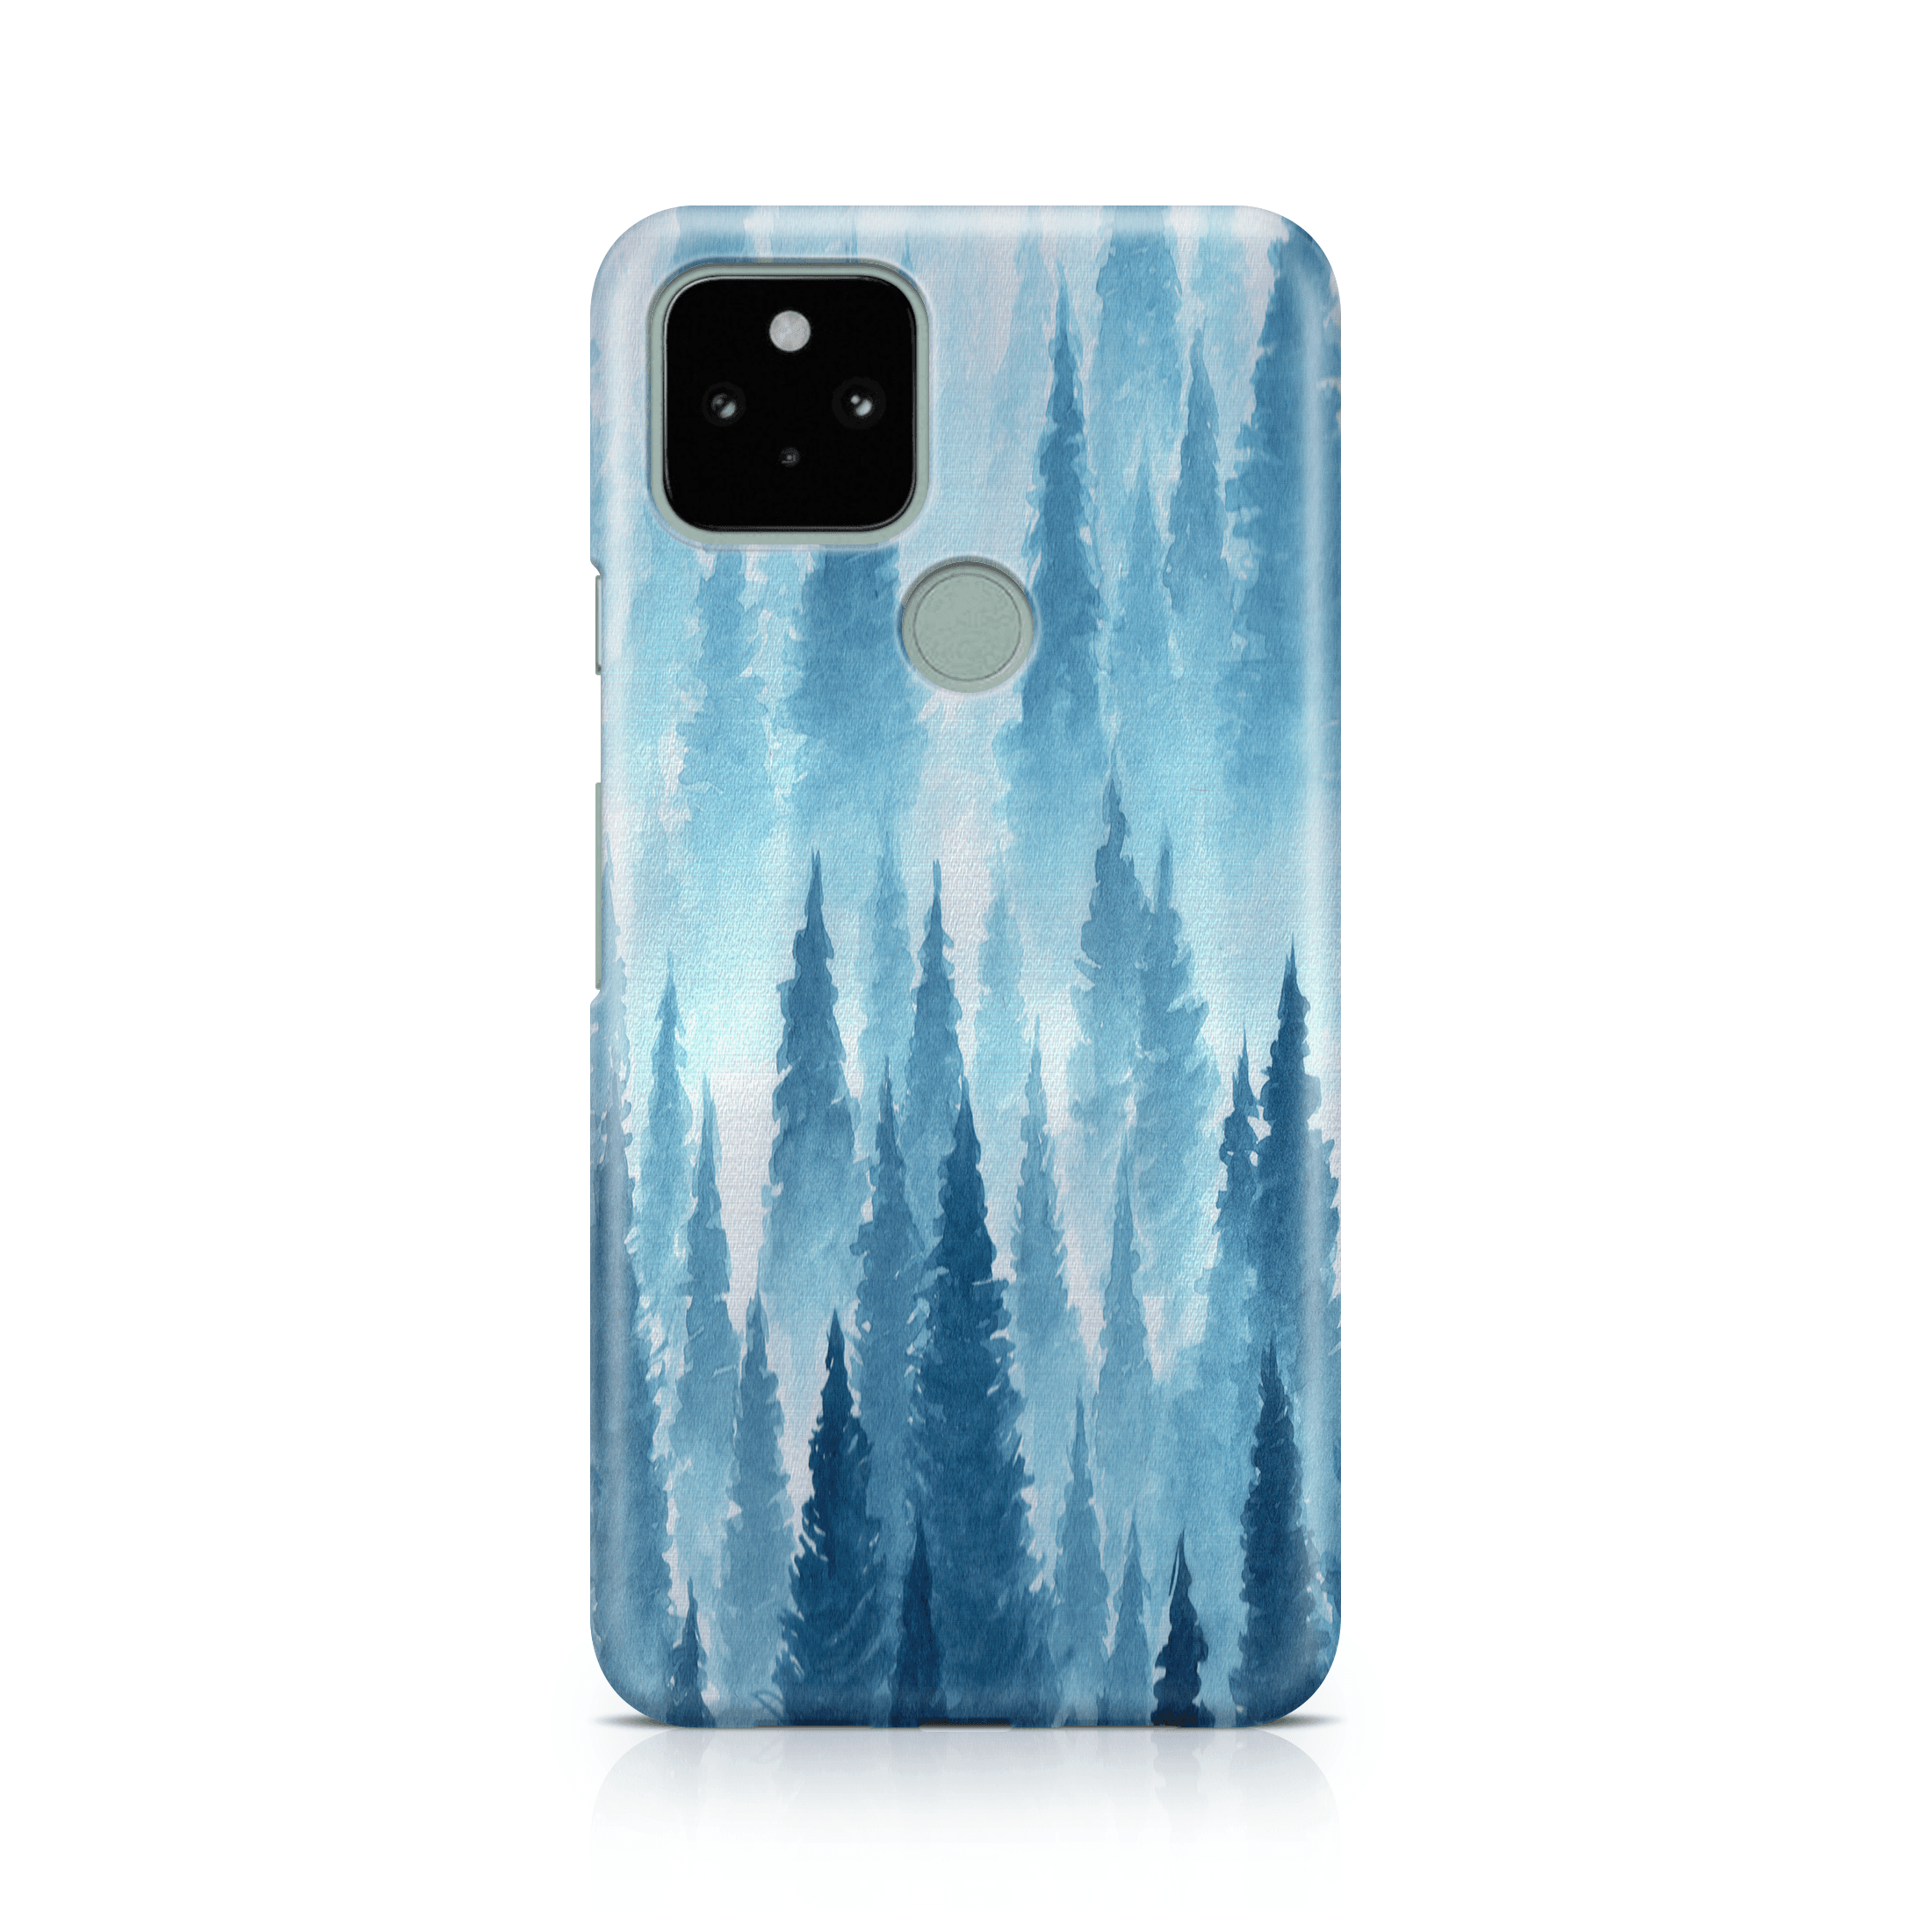 Blue Winter Forest - Google phone case designs by CaseSwagger